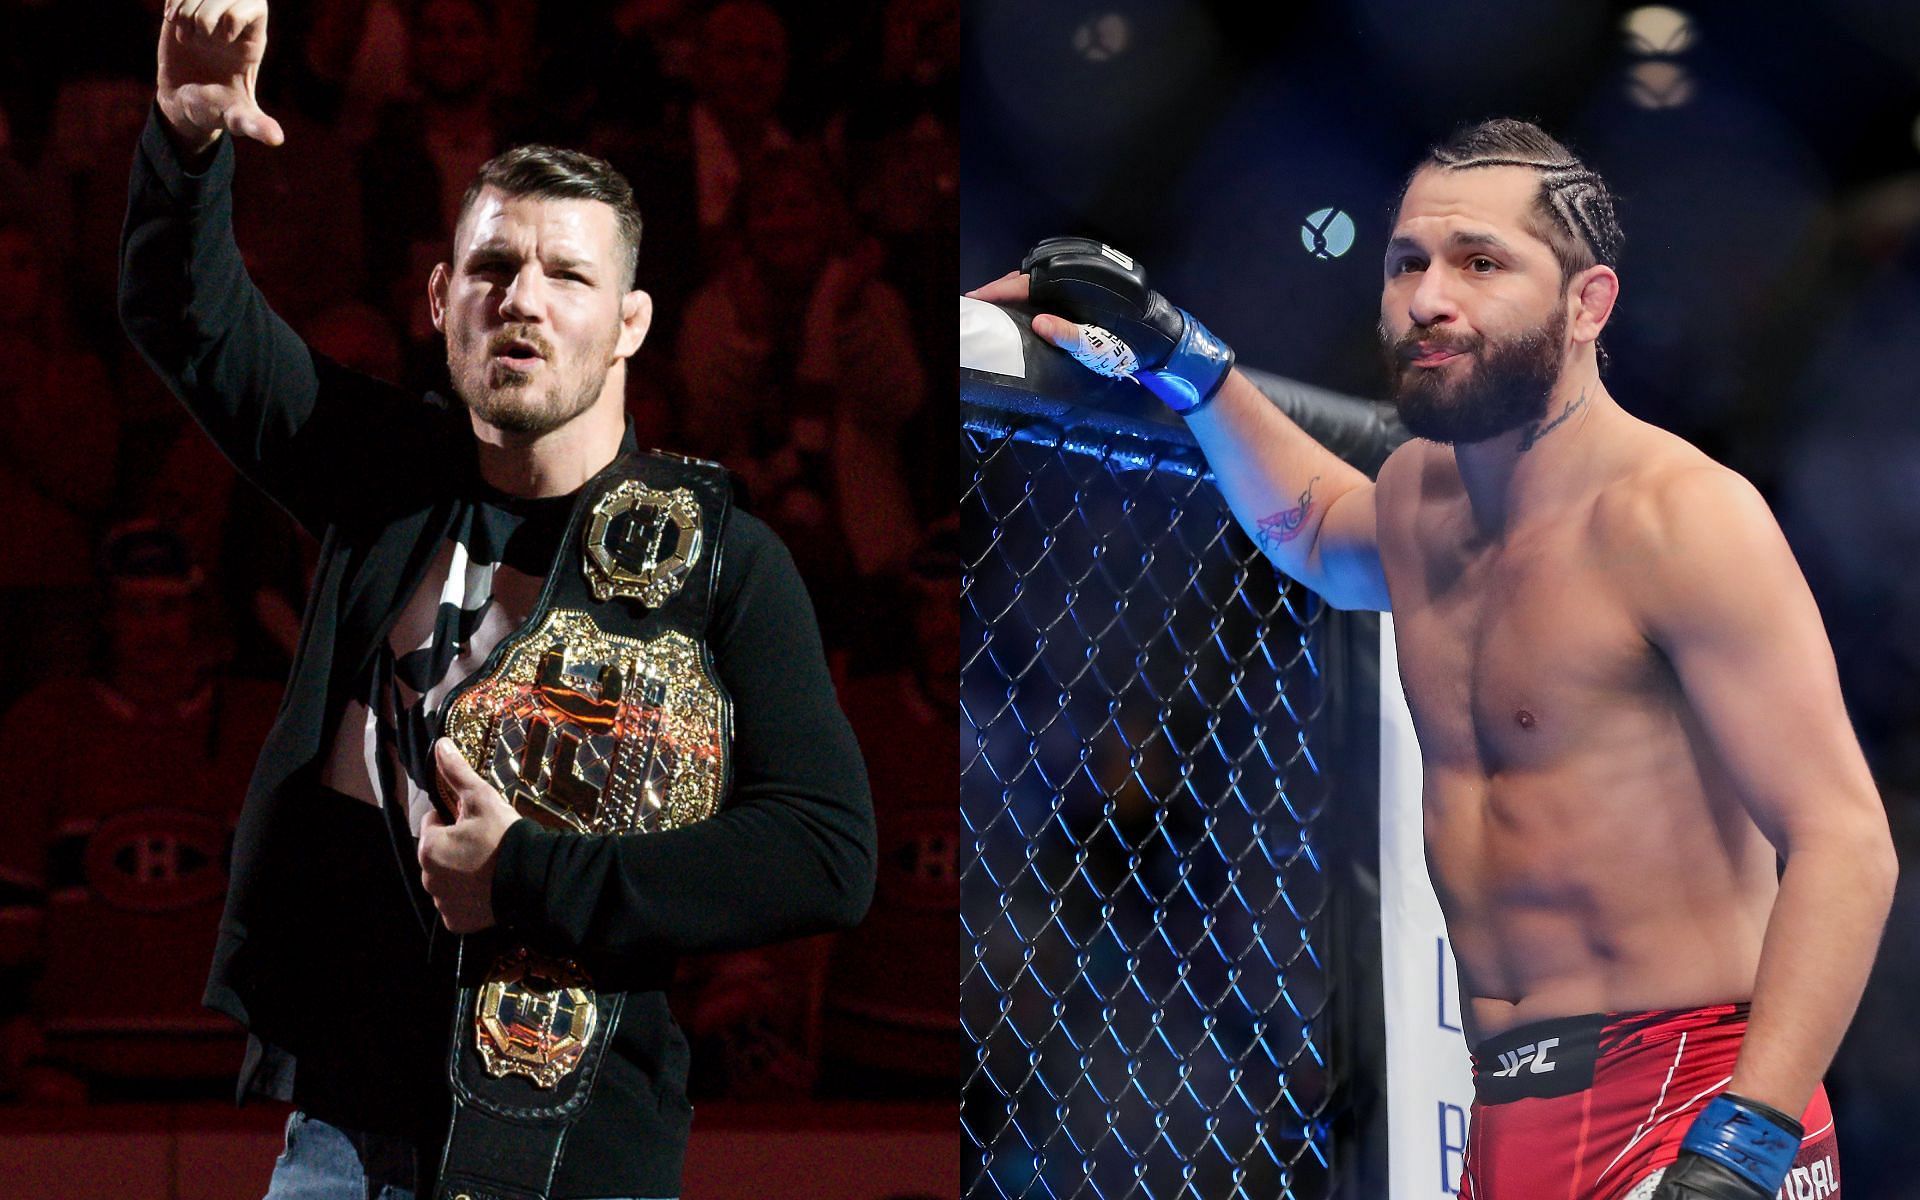 Michael Bisping (left) and Jorge Masvidal (right) (Images via Getty)